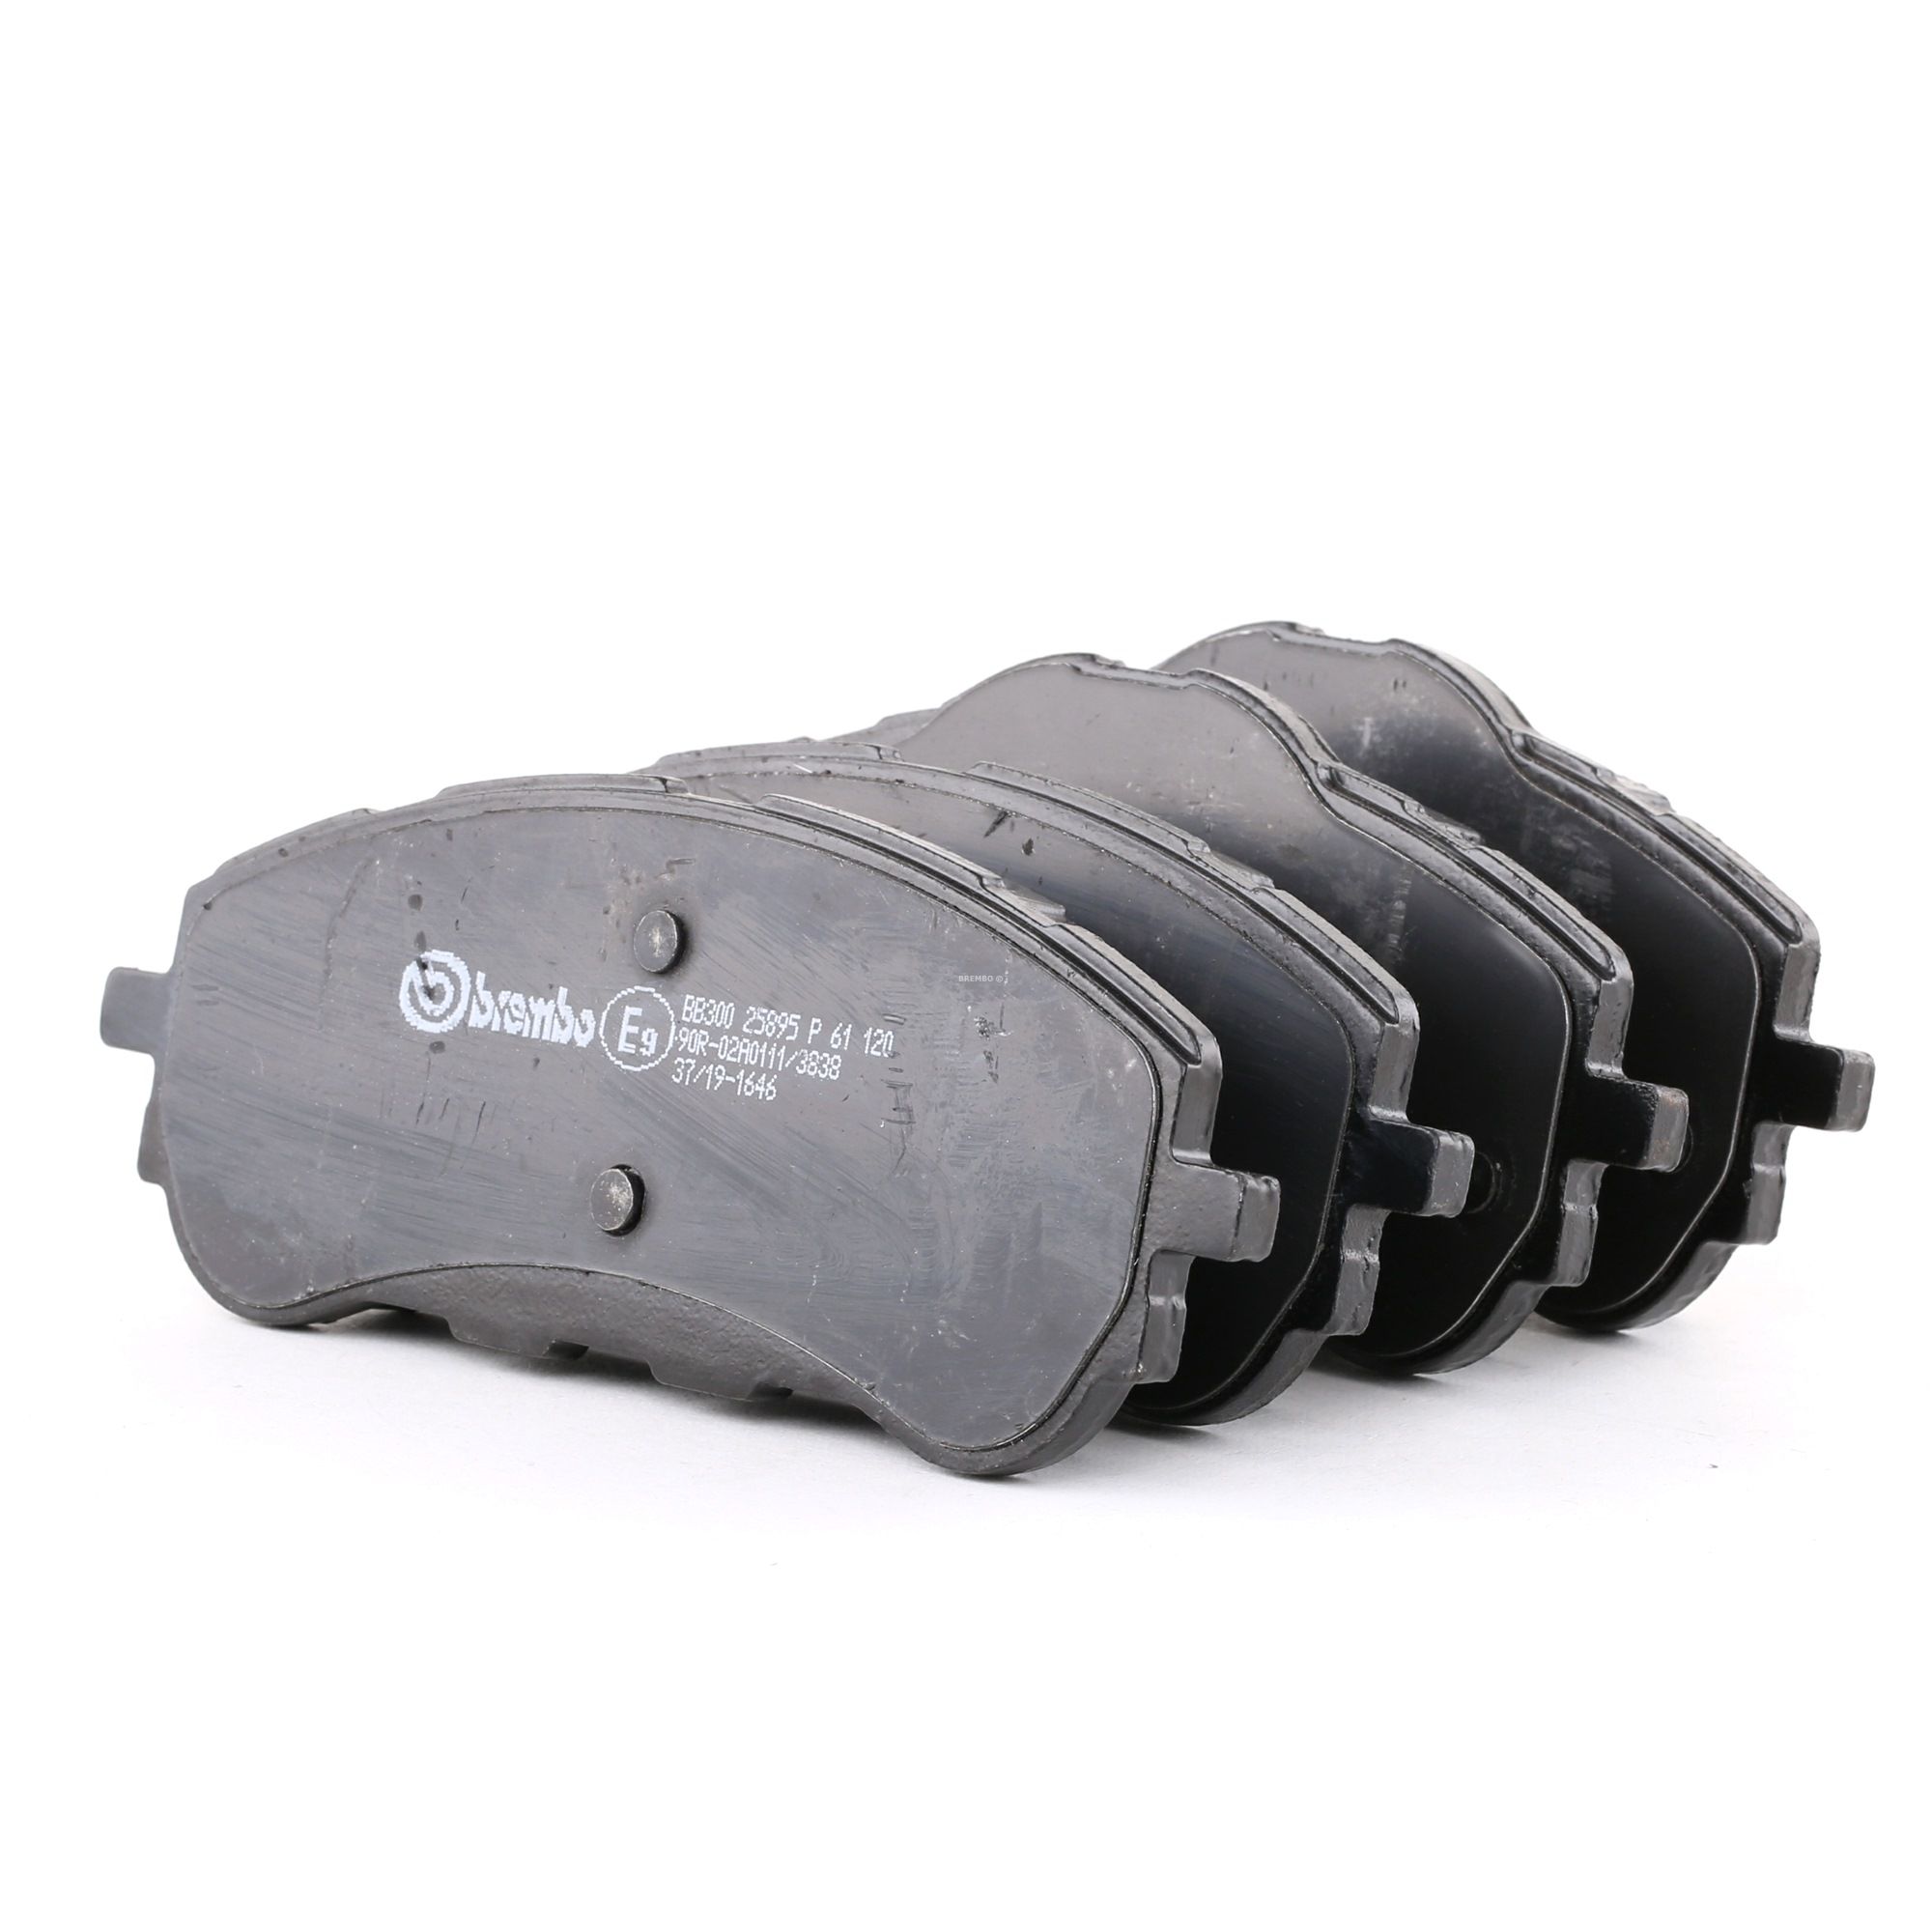 BREMBO P 61 120 Brake pad set excl. wear warning contact, with brake caliper screws, with accessories